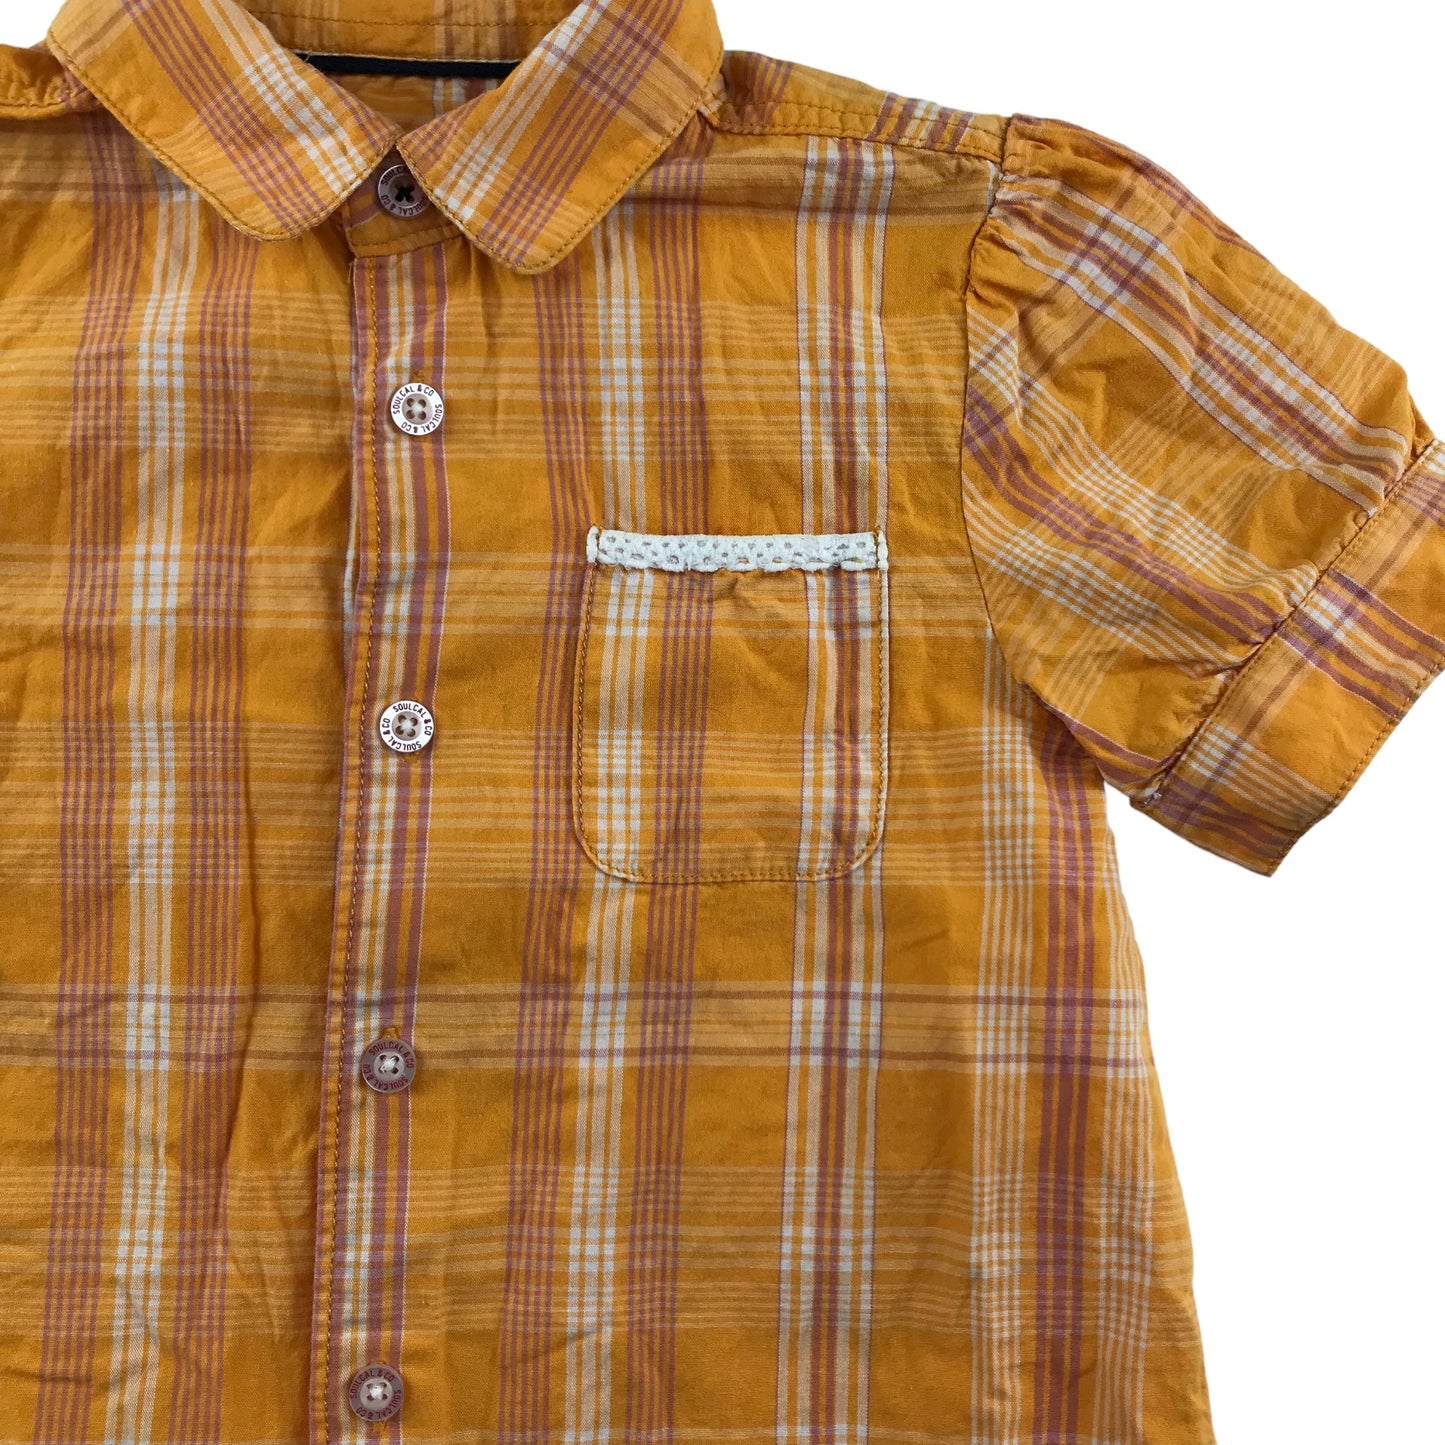 SoulCal Shirt Age 6 Orangey Yellow Checked Short Sleeve Blouse Cotton